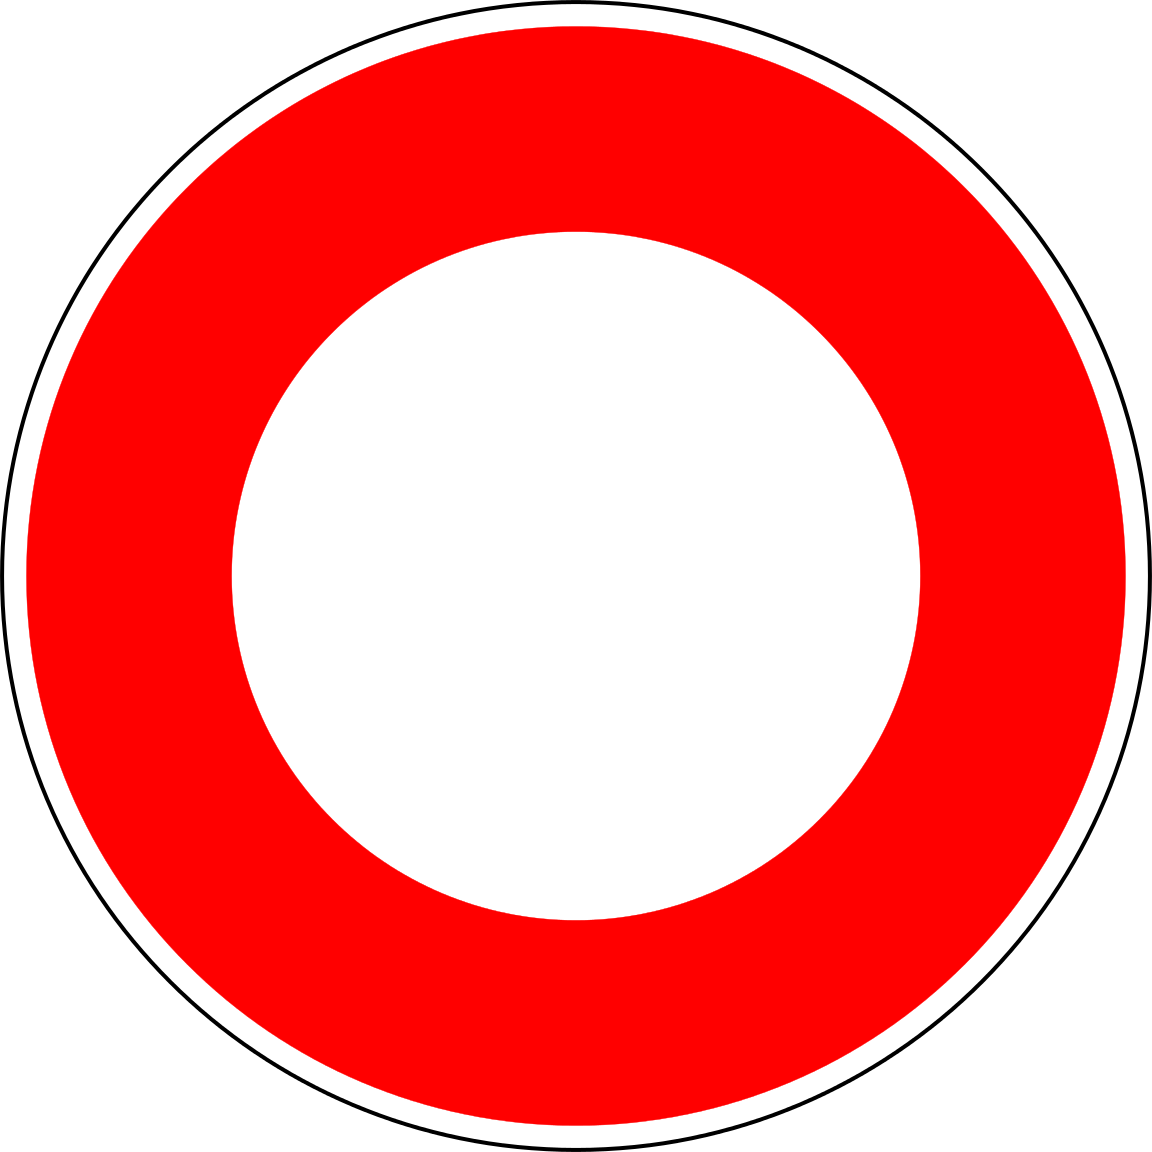 A Red Circle With White Circle In Center